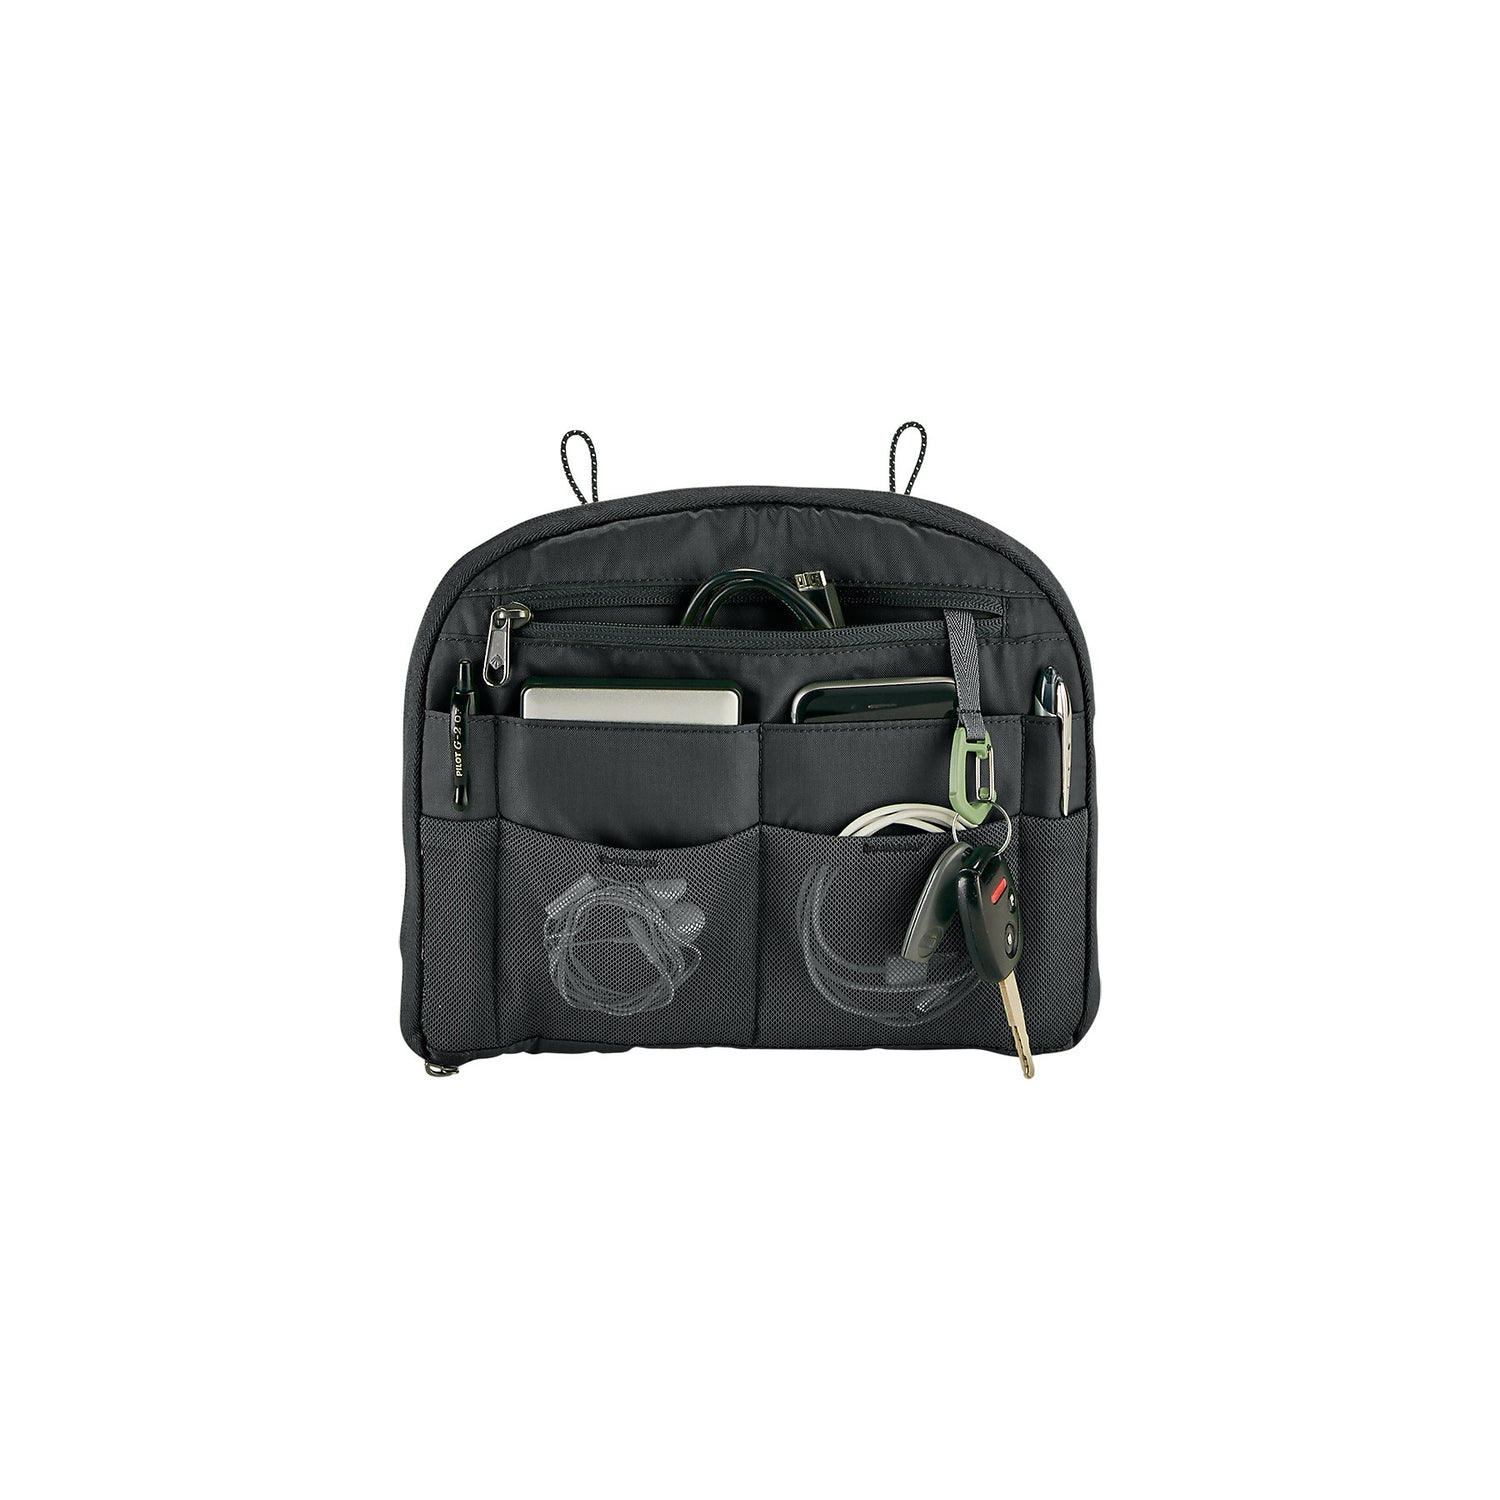 PACK-IT™ Reveal Org Convertible Pack